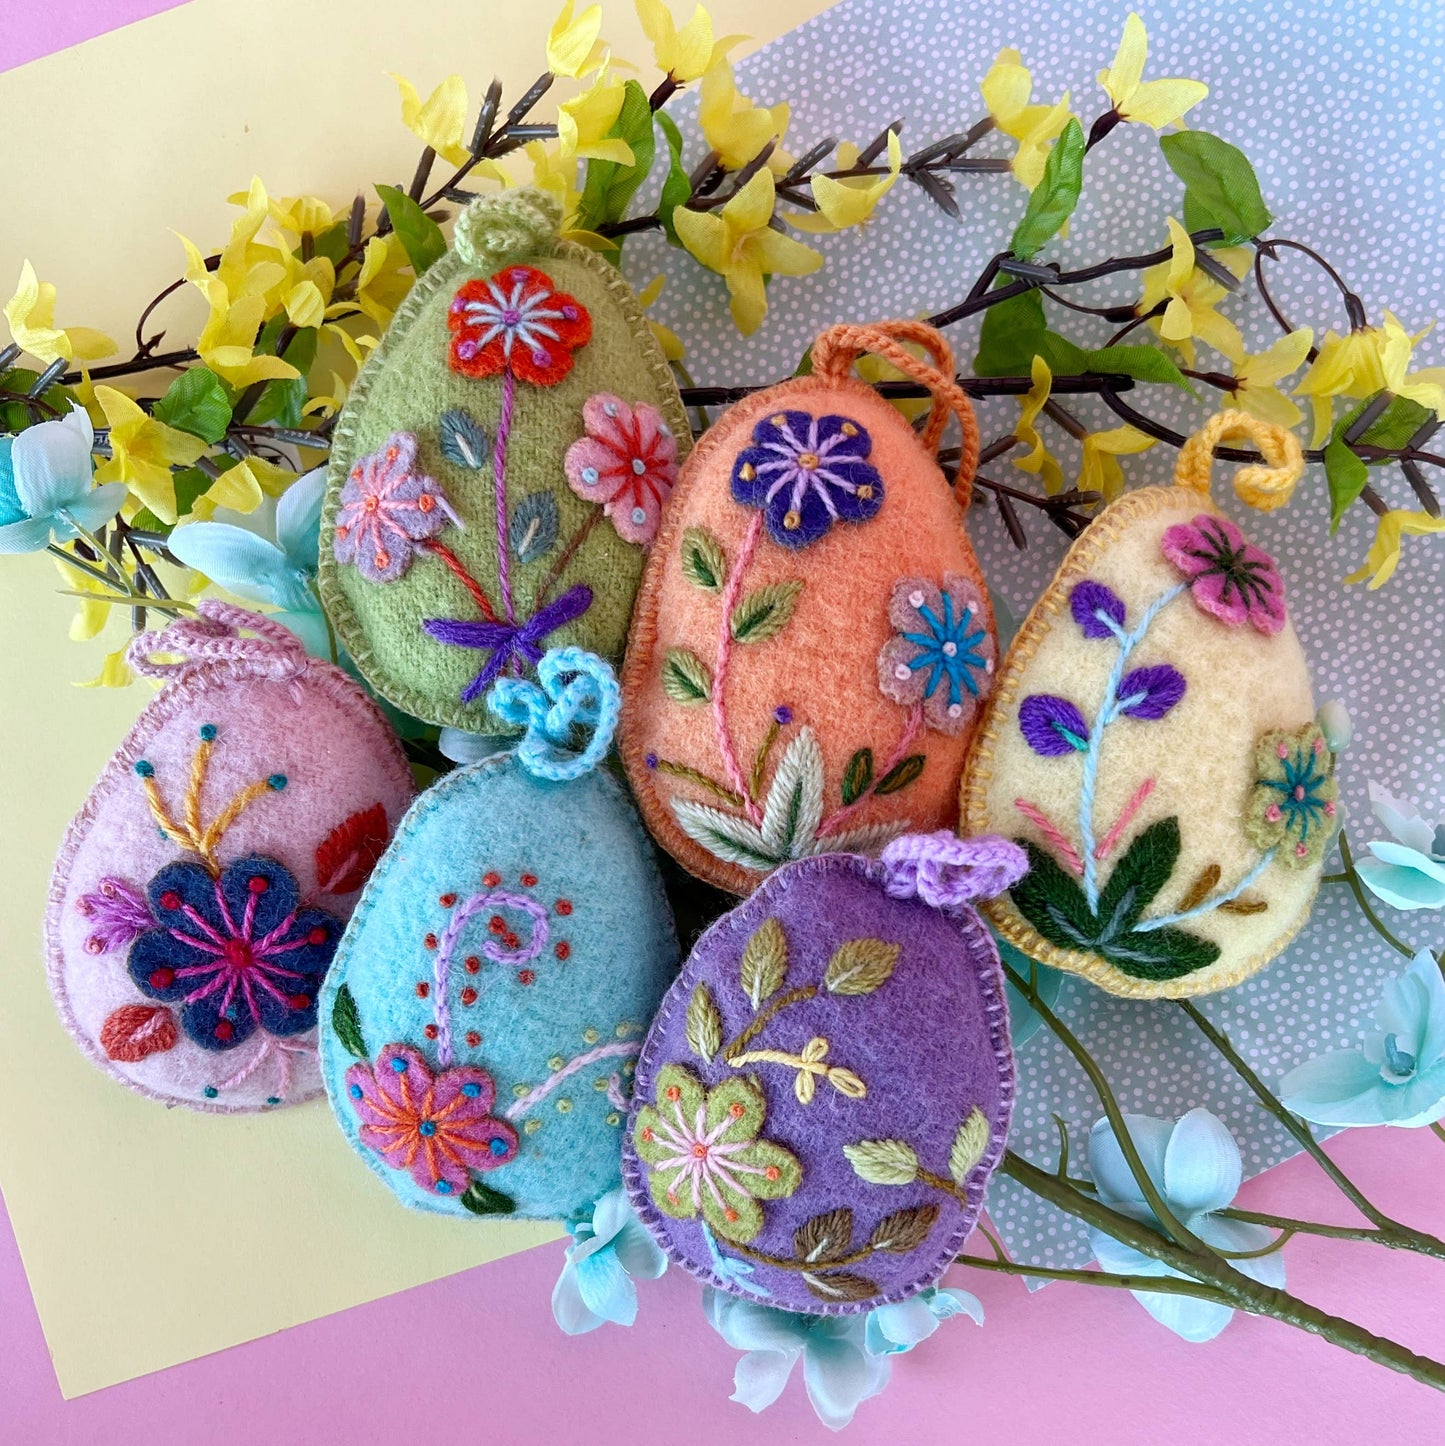 Embroidered Easter Egg Ornament